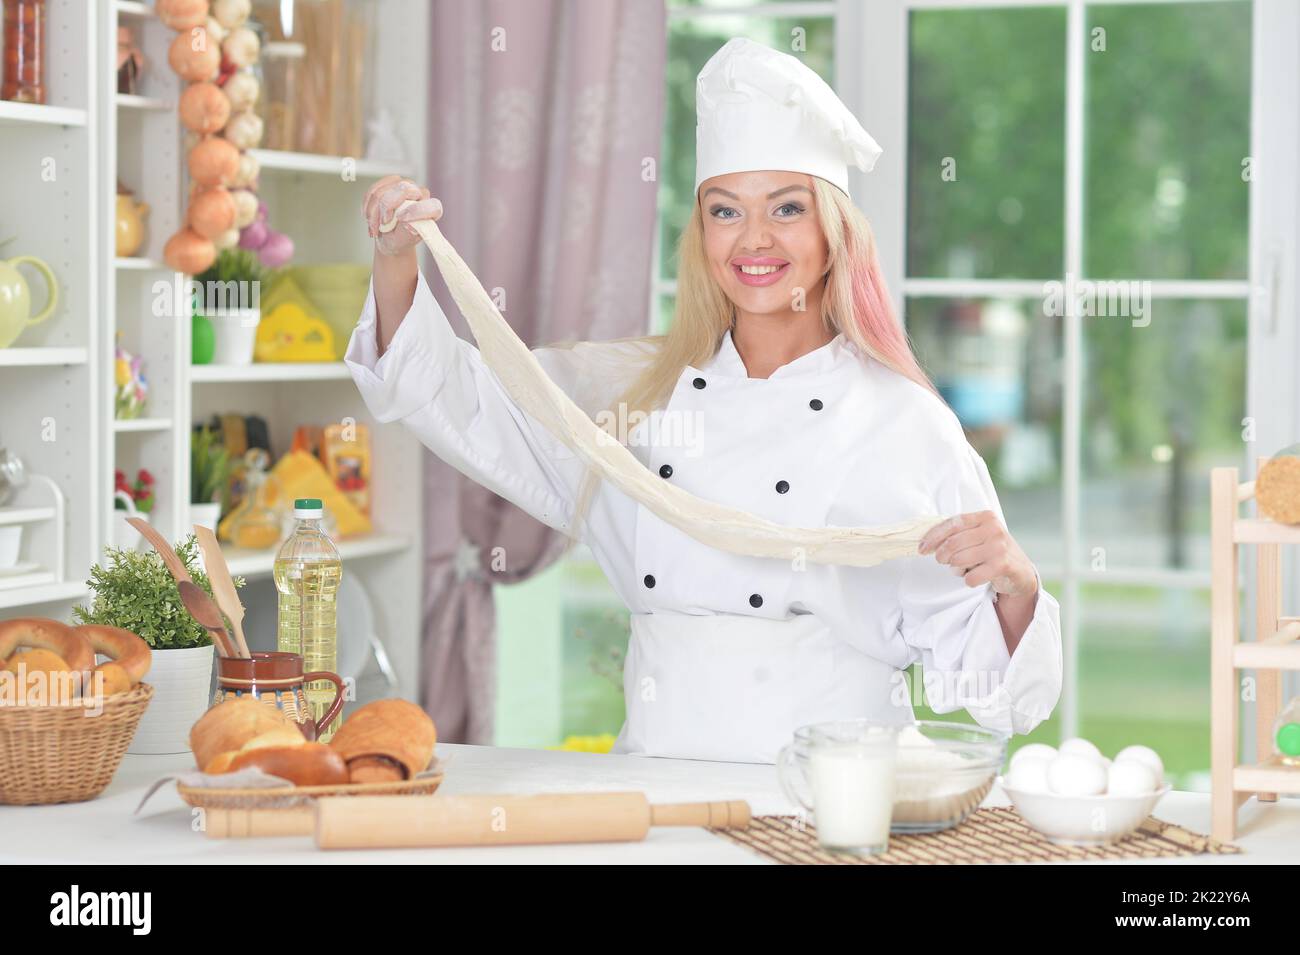 Young woman cooking healthy food in kitchen Stock Photo